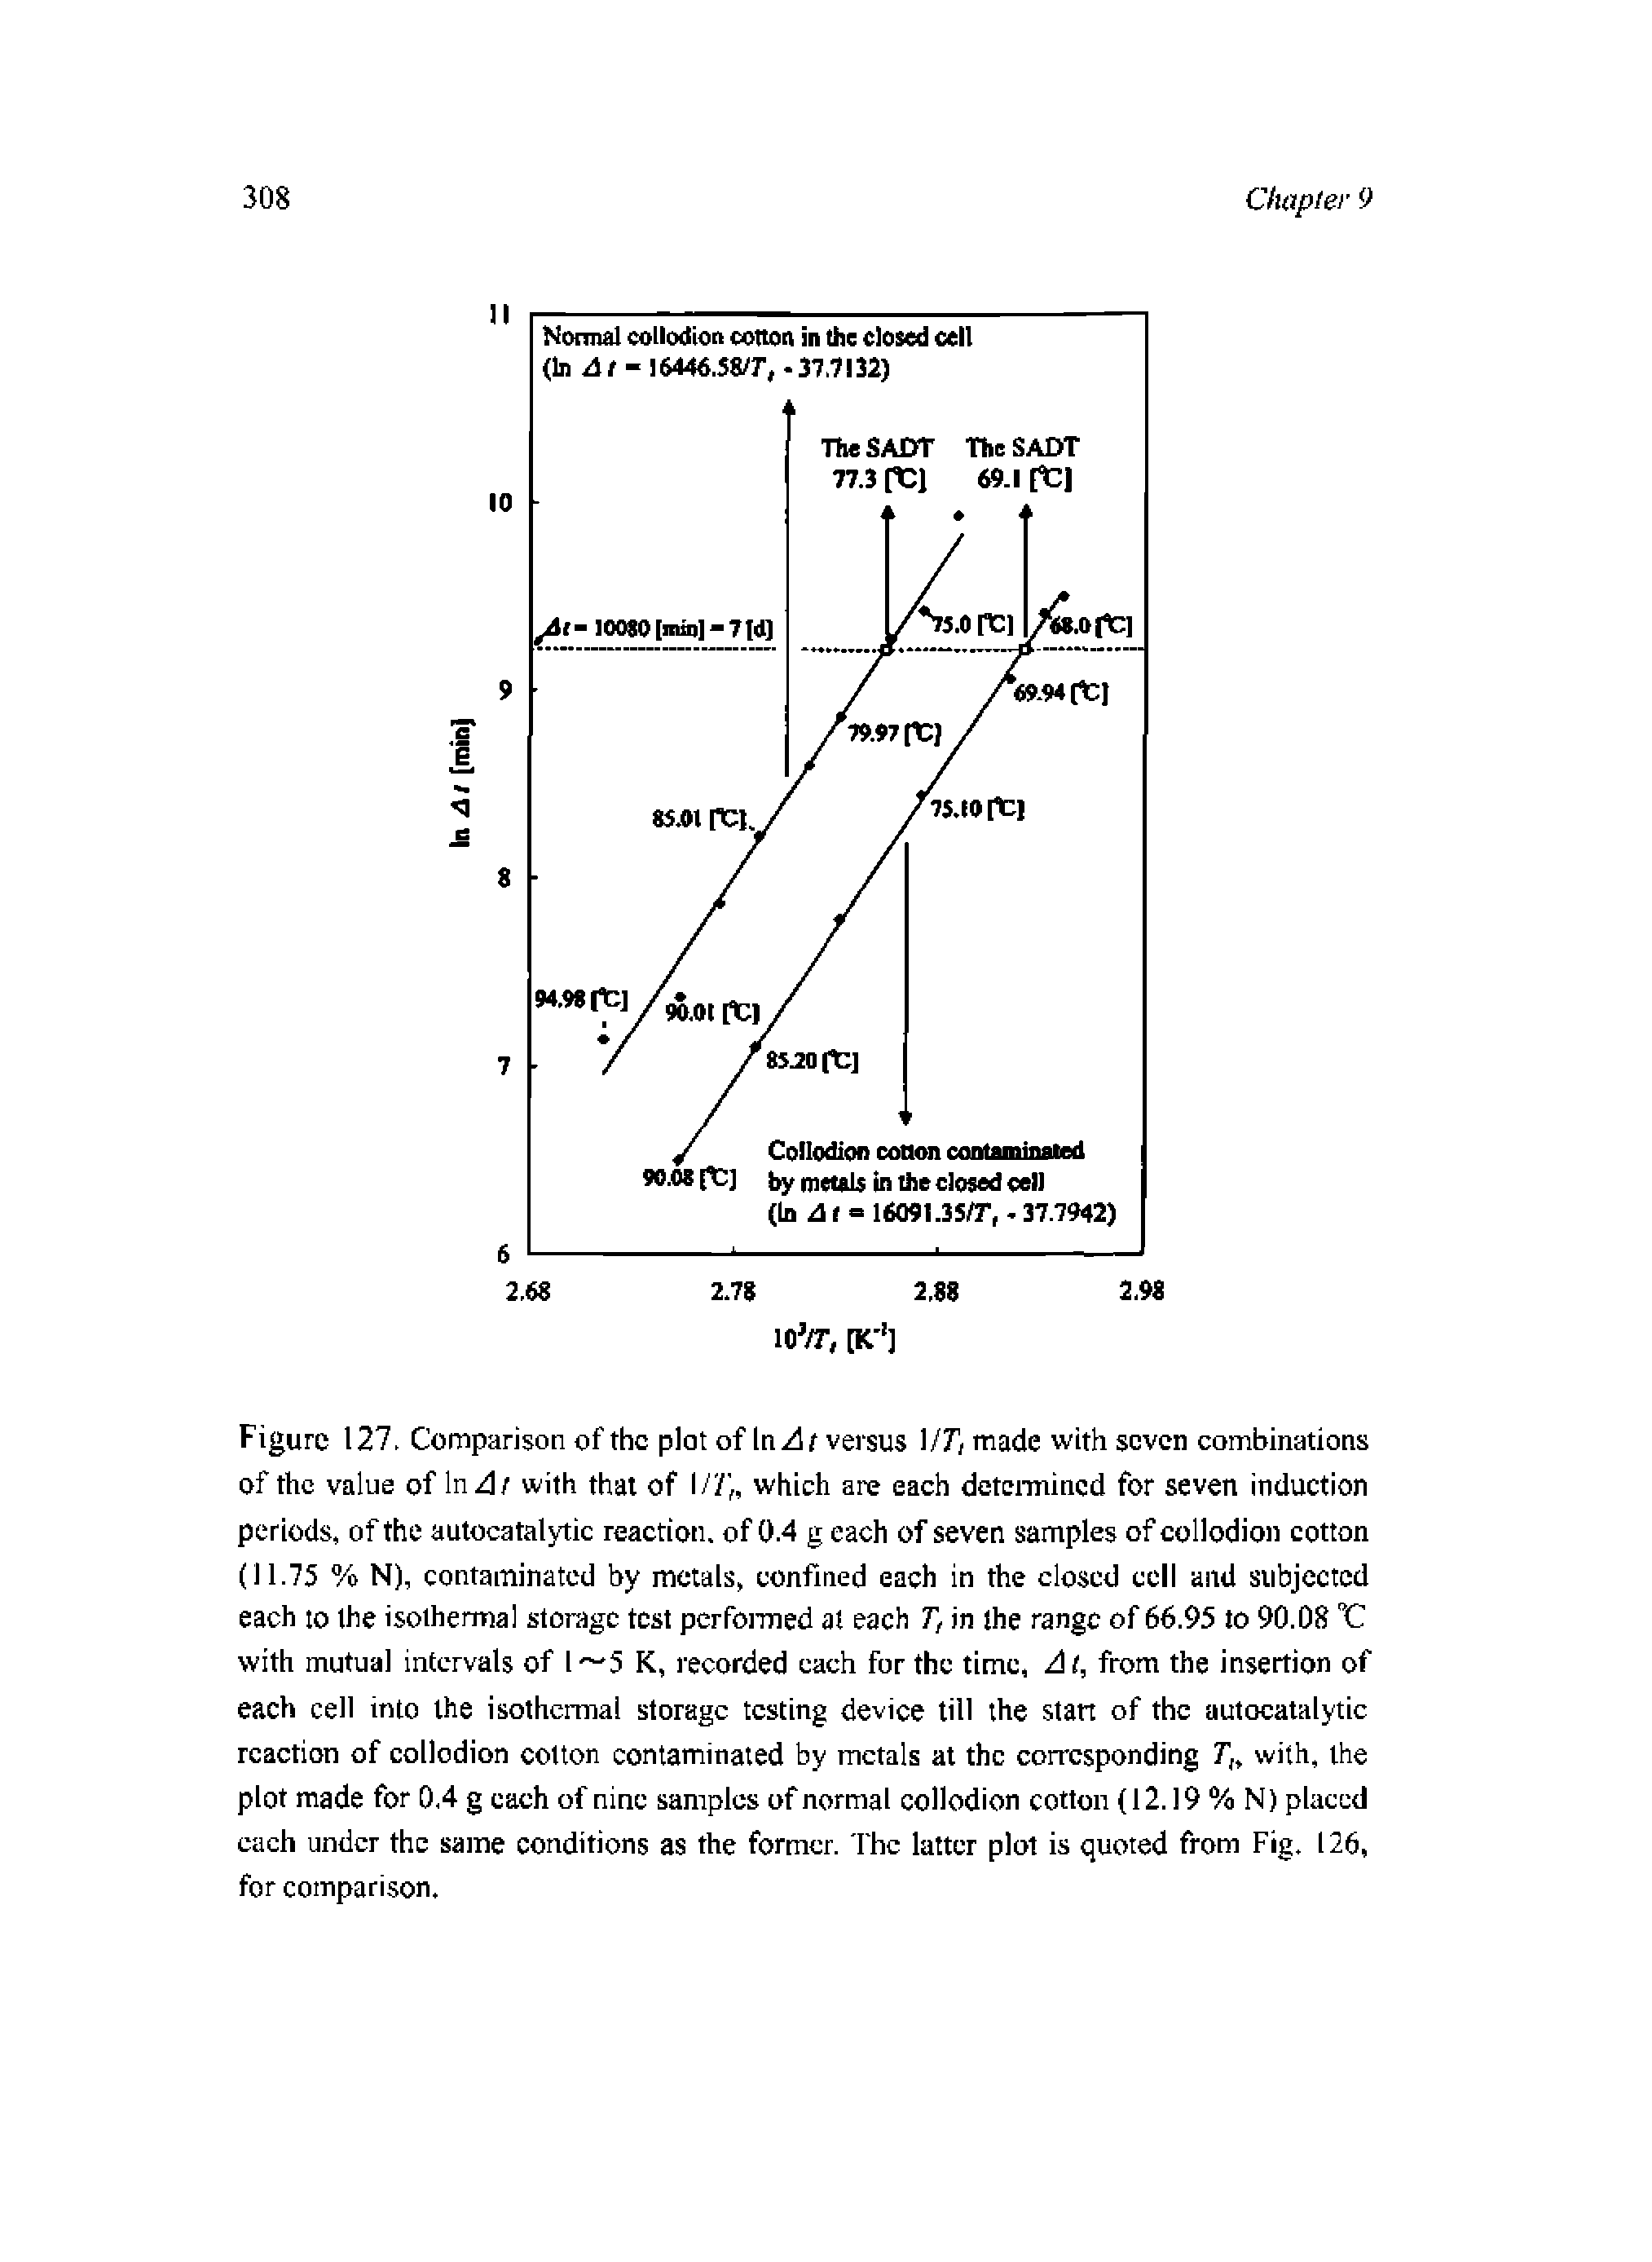 Figure 127. Comparison of the plot of In versus l/Ti made with seven combinations of the value of InZl/ with that of // which are each determined for seven induction periods, of the autocatalytic reaction, of 0.4 g each of seven samples of collodion cotton (11.75 % N), contaminated by metals, confined each in the closed cell and subjected each to the isothermal storage test pcrfomied at each 7", in the range of 66.95 to 90.08 C with mutual intervals of 1 5 K, recorded each for the time, At, from the insertion of each cell into the isothermal storage testing device till the start of the autocatalytic reaction of collodion cotton contaminated by metals at the corresponding T with, the plot made for 0.4 g each of nine samples of normal collodion cotton 12.19 % N) placed each under the same conditions as the former, fhe latter plot is quoted from Fig. 126, for comparison.